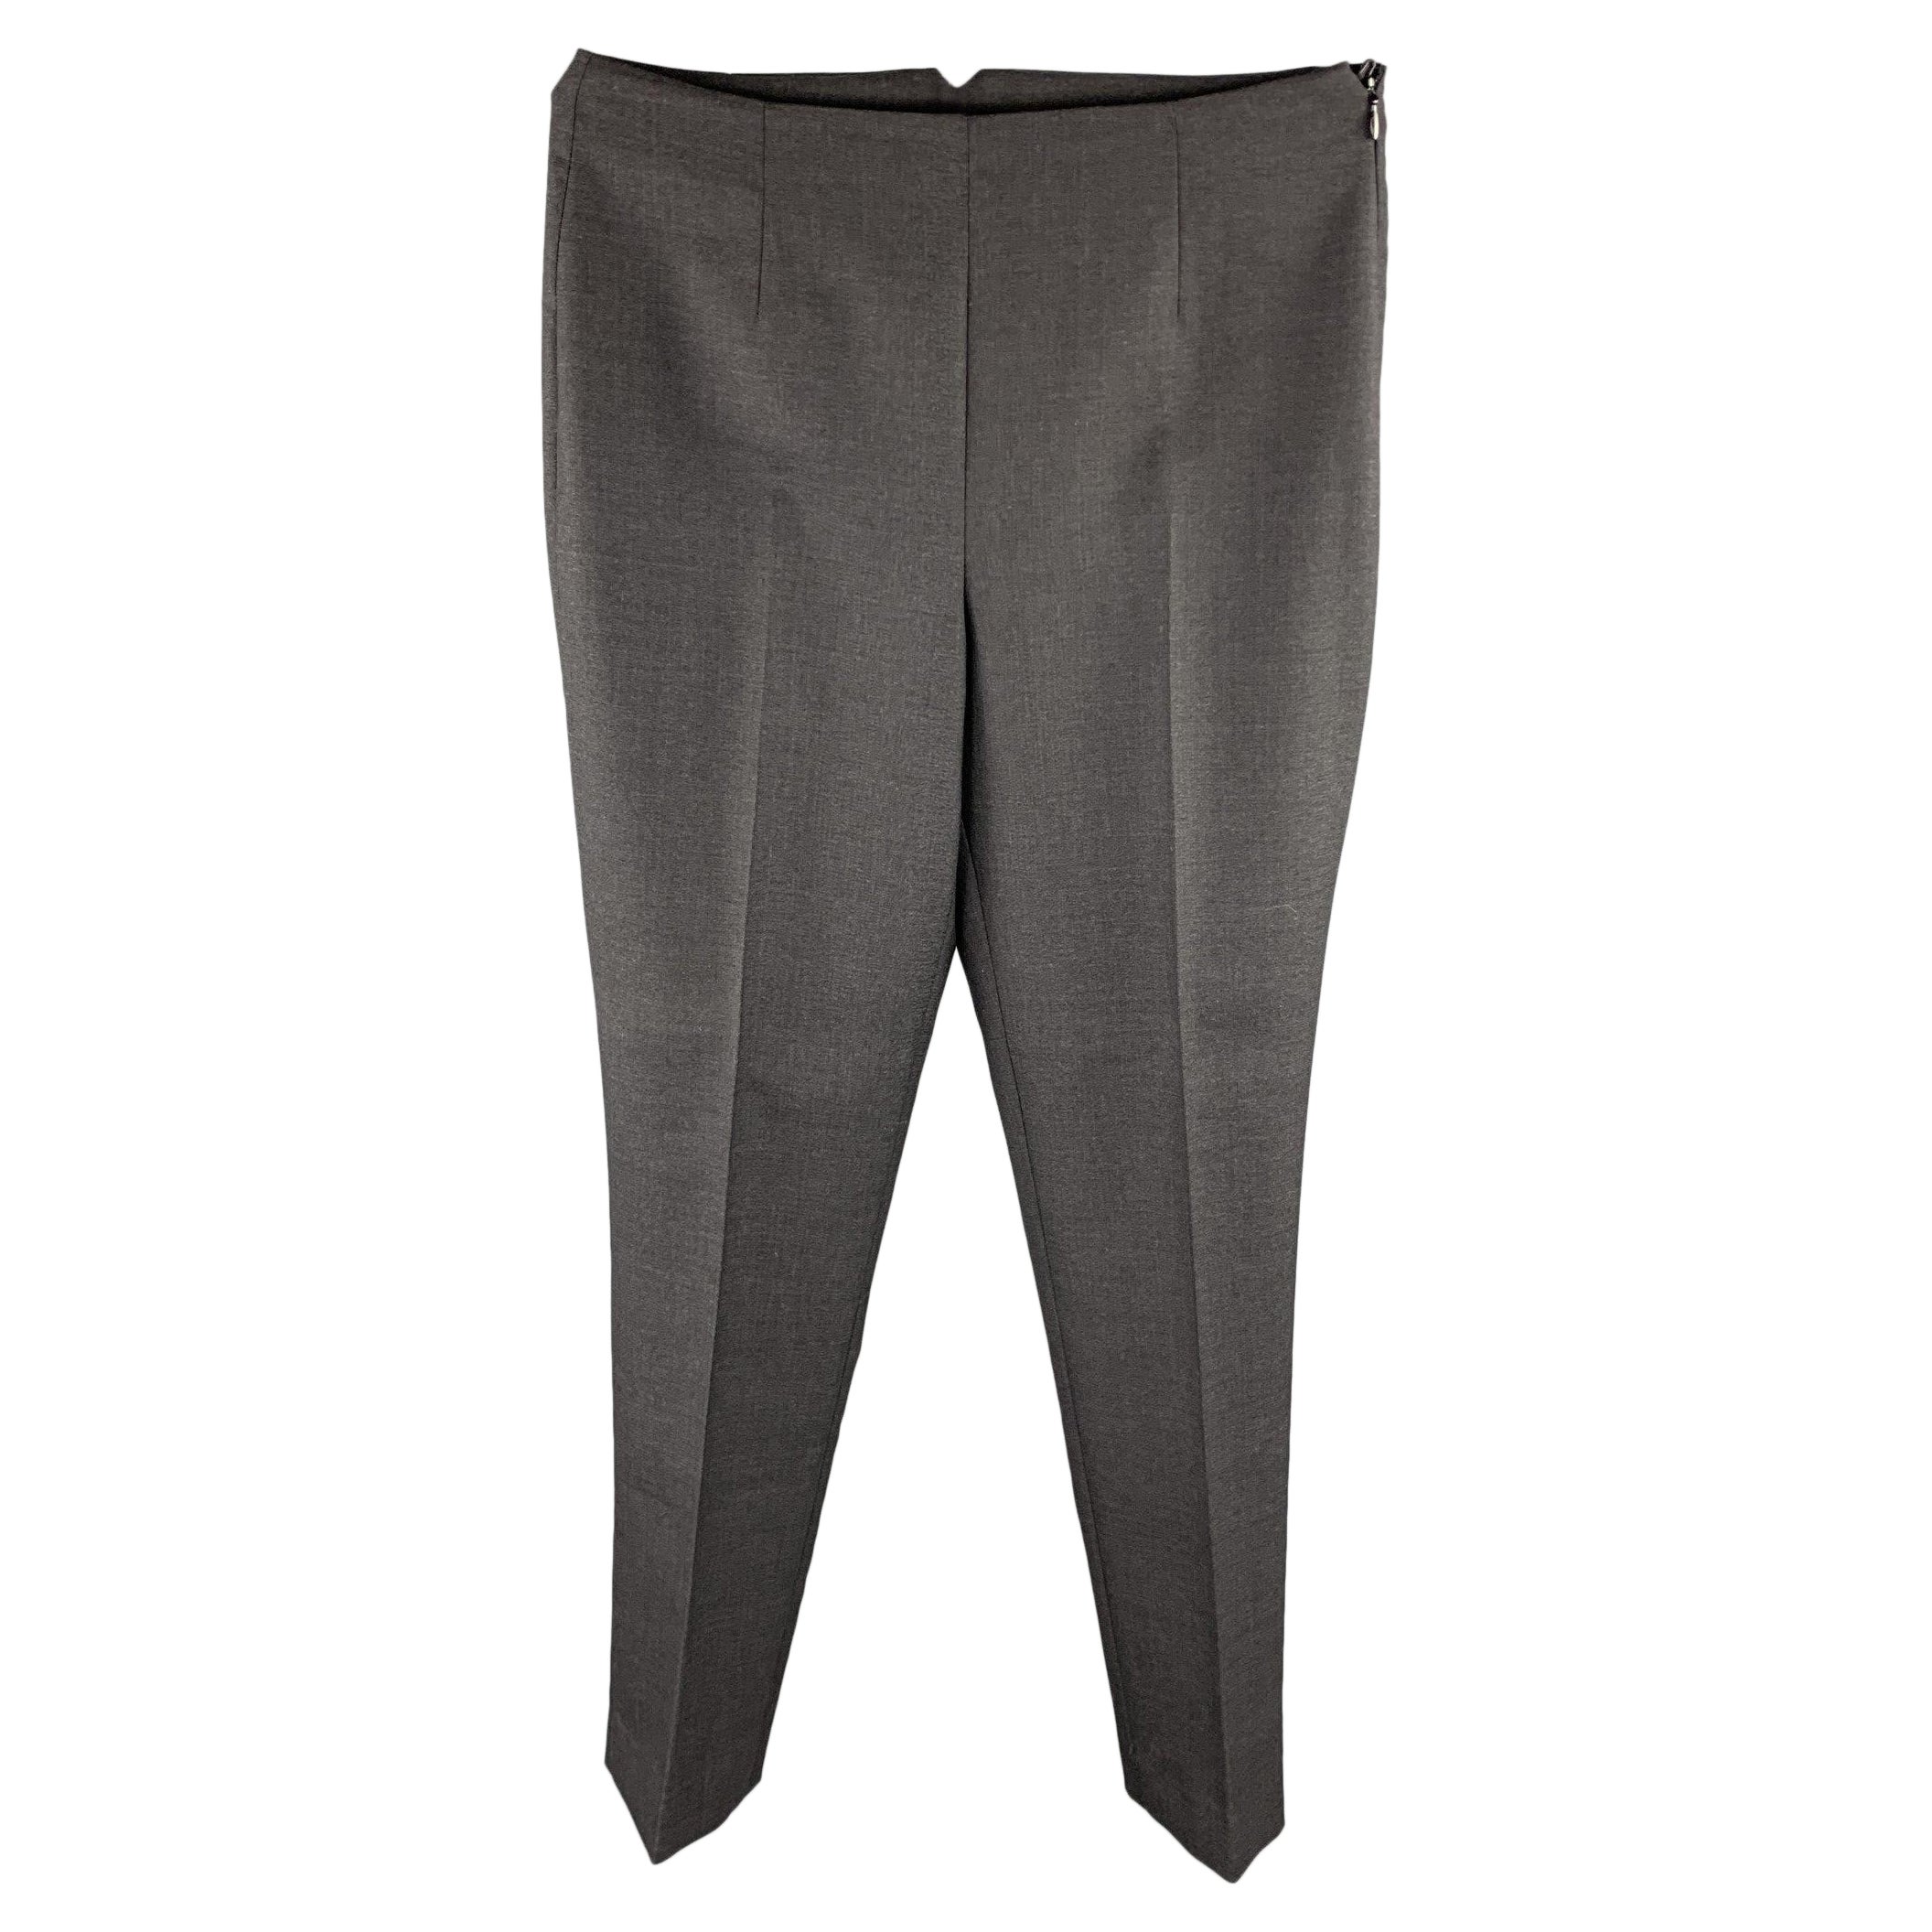 RALPH LAUREN COLLECTION Size 4 Grey Pleated Dress Pants For Sale